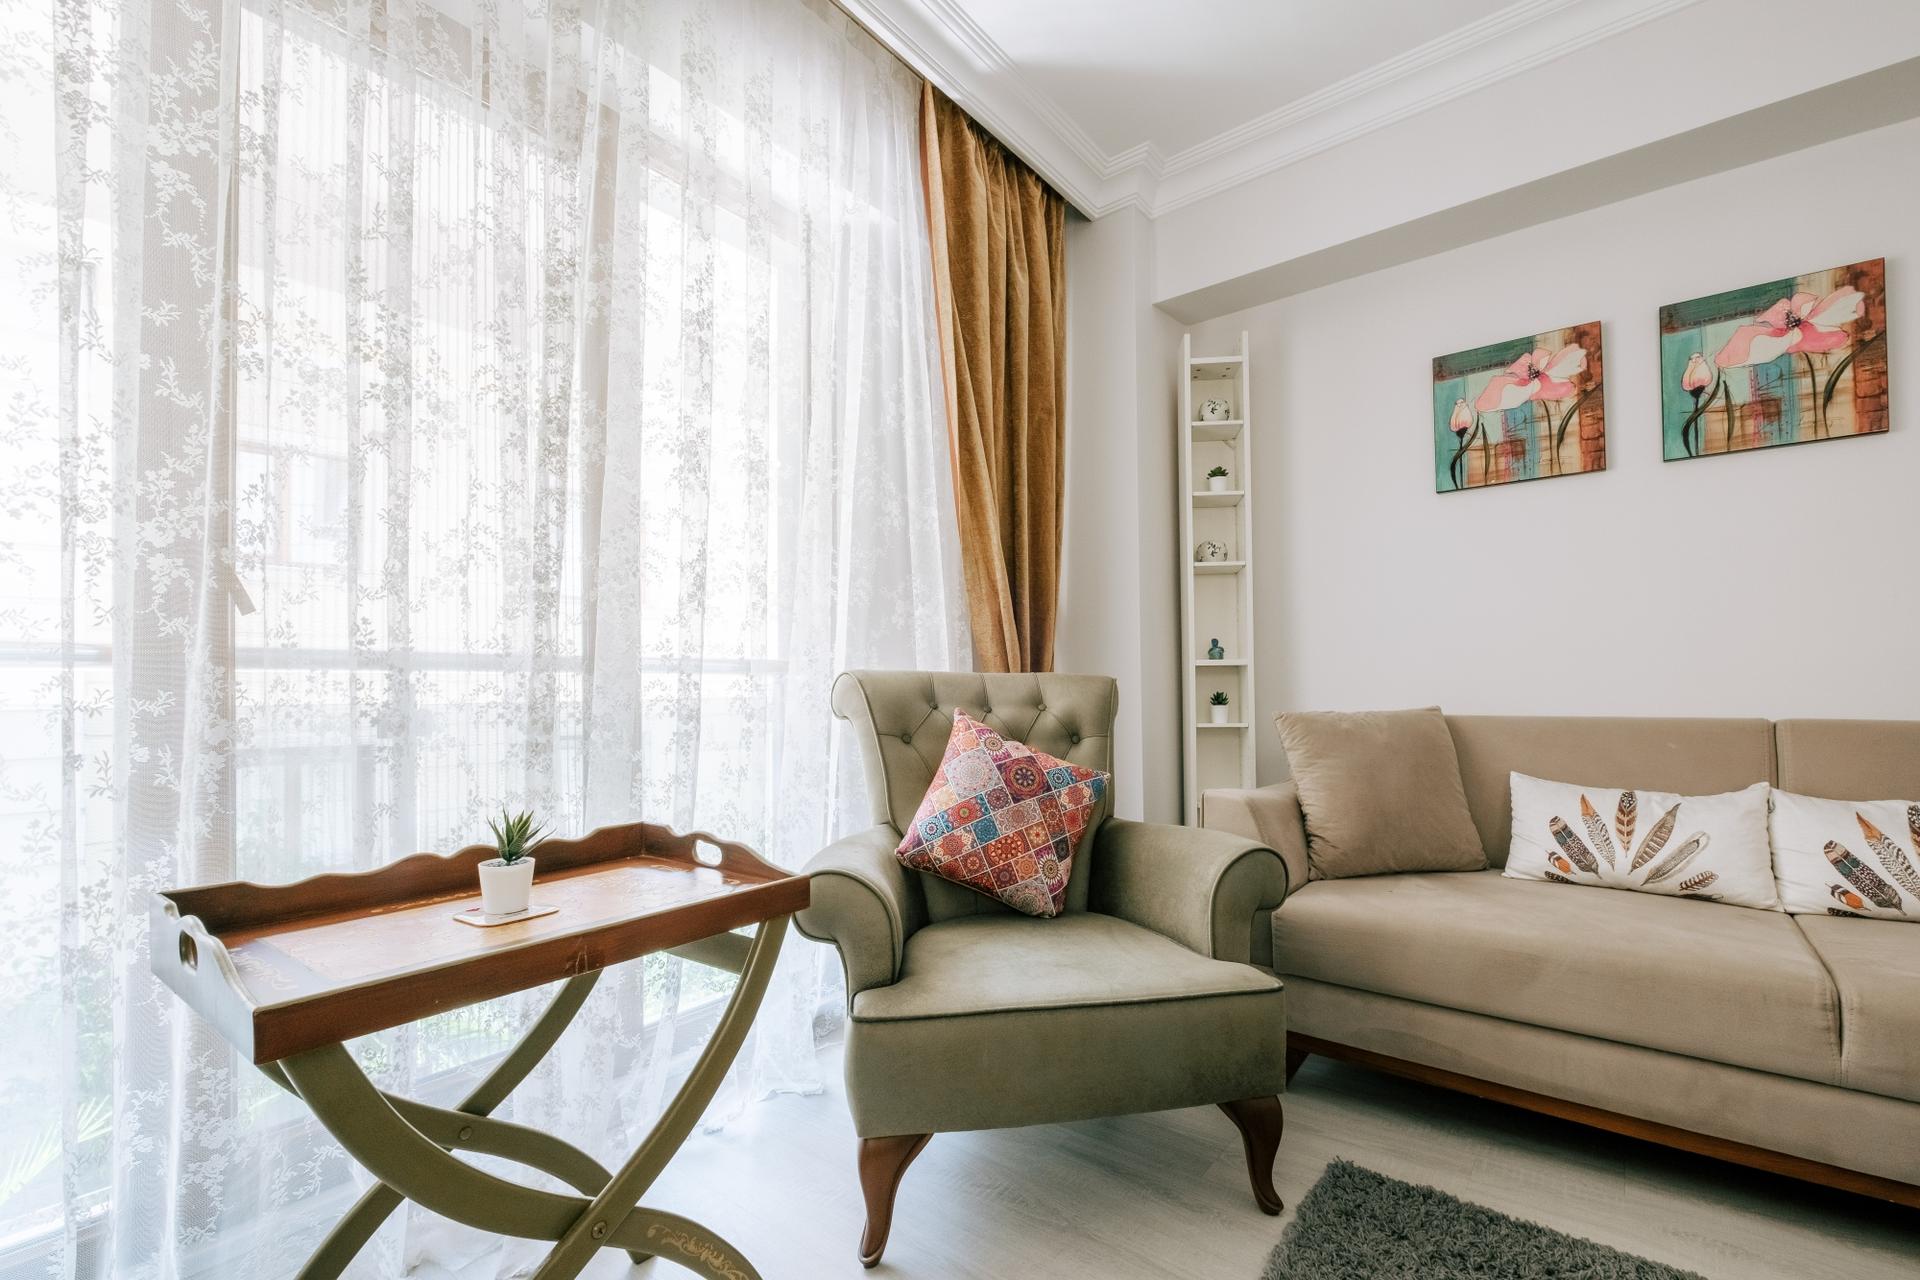 Your mood will always be up in this airy and sun-drenched flat.